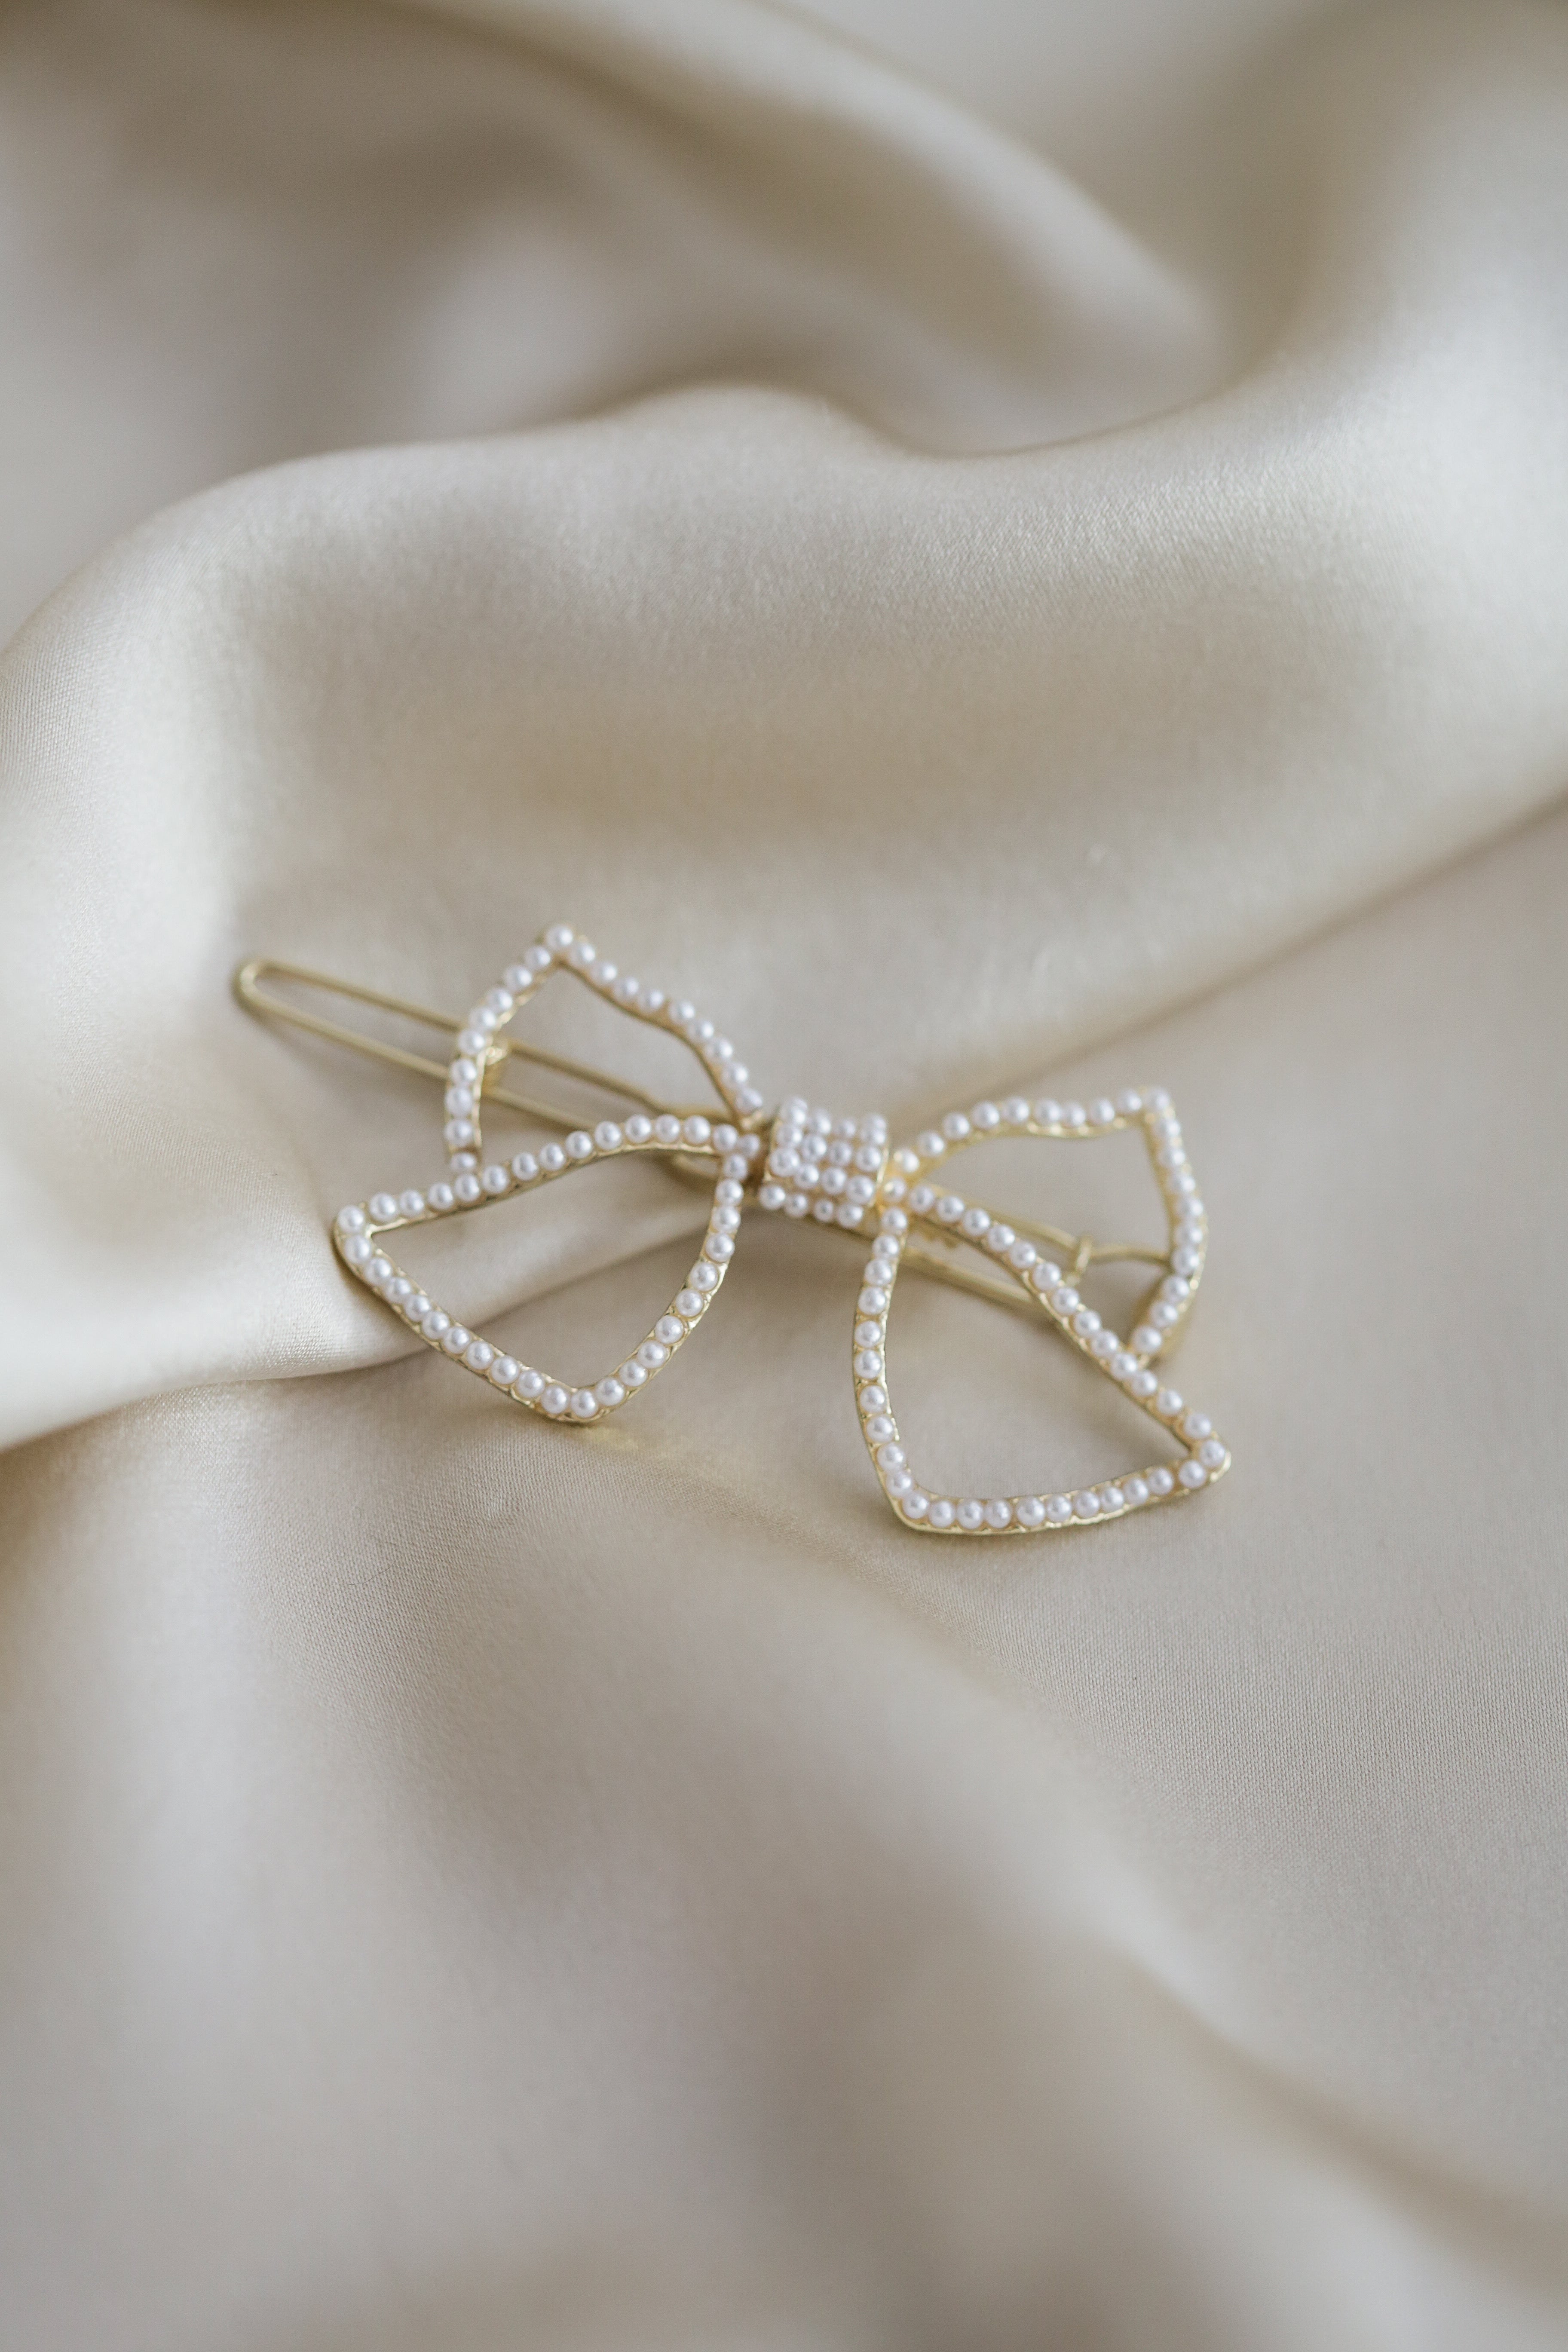 The Heart - Bow Pearls Hair Clip - Boutique Minimaliste has waterproof, durable, elegant and vintage inspired jewelry